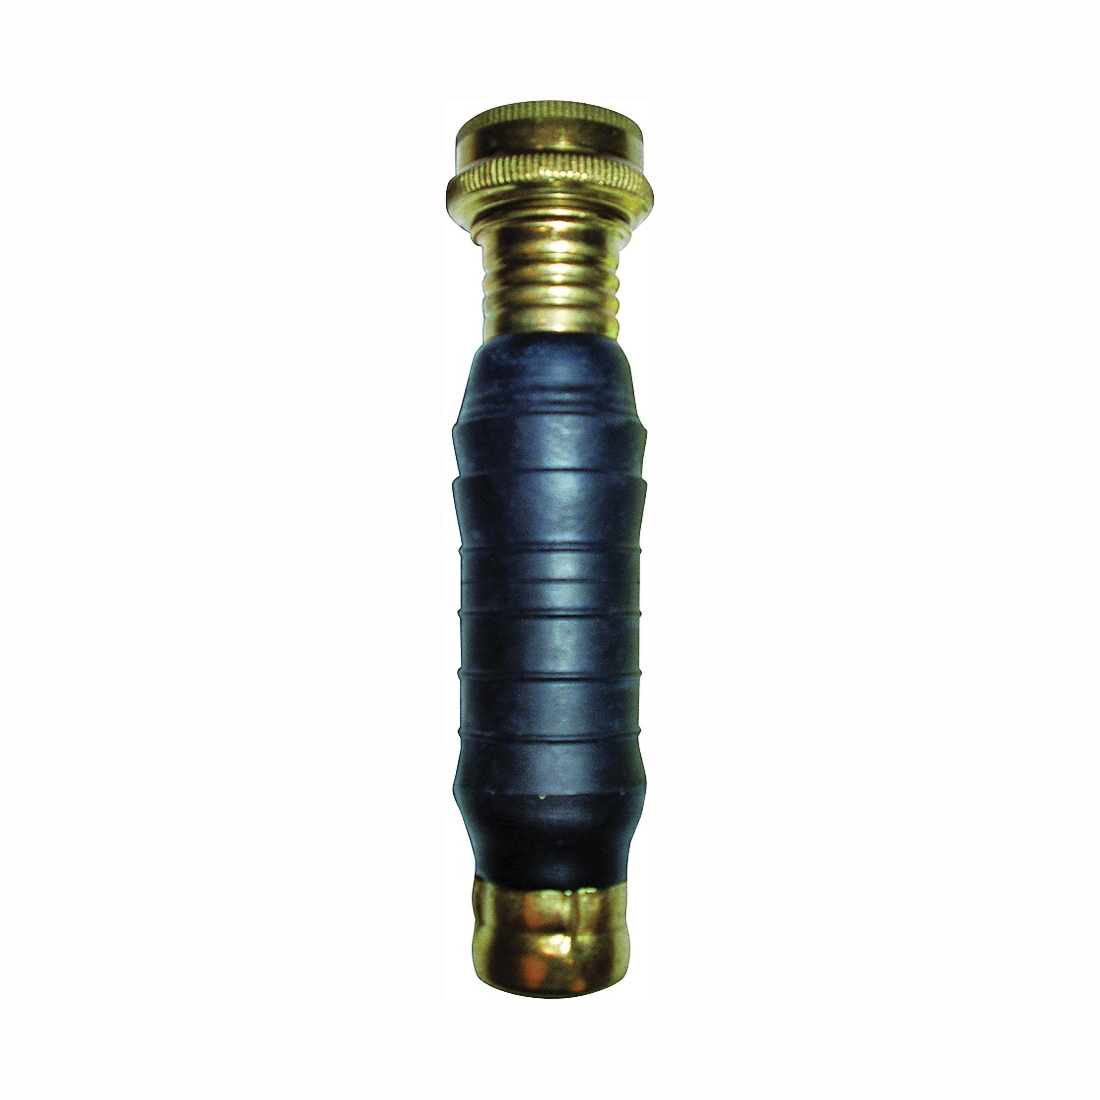 501 Drain Opener/Cleaner, 50 to 80 psi Pressure, 1 to 2 in Drain